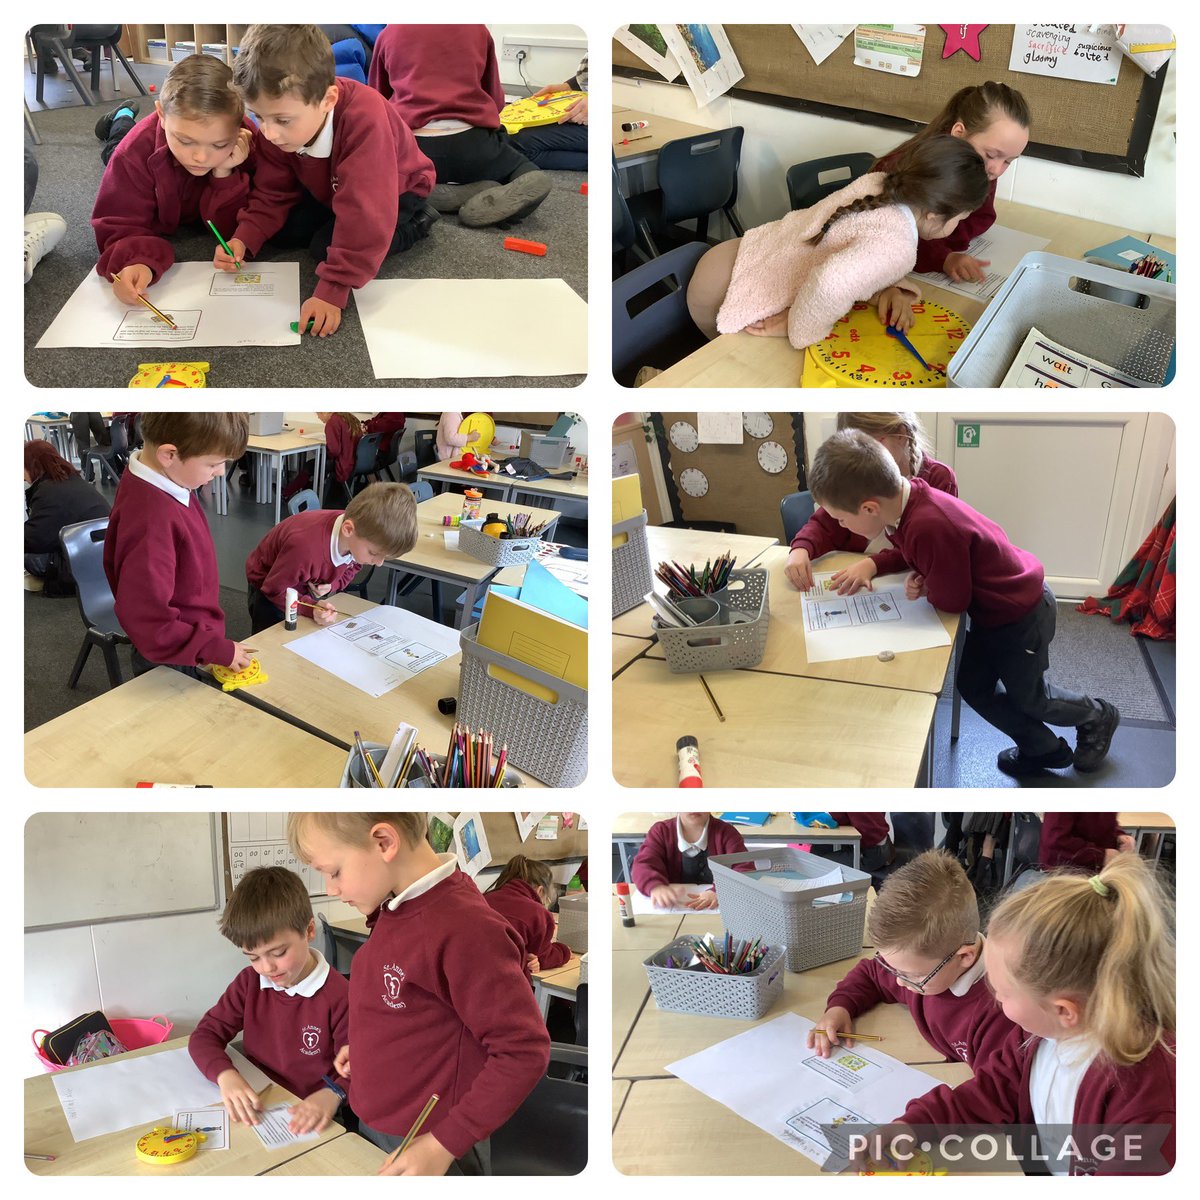 We worked so well with maths partners today to solve some time problems ⏰😃.